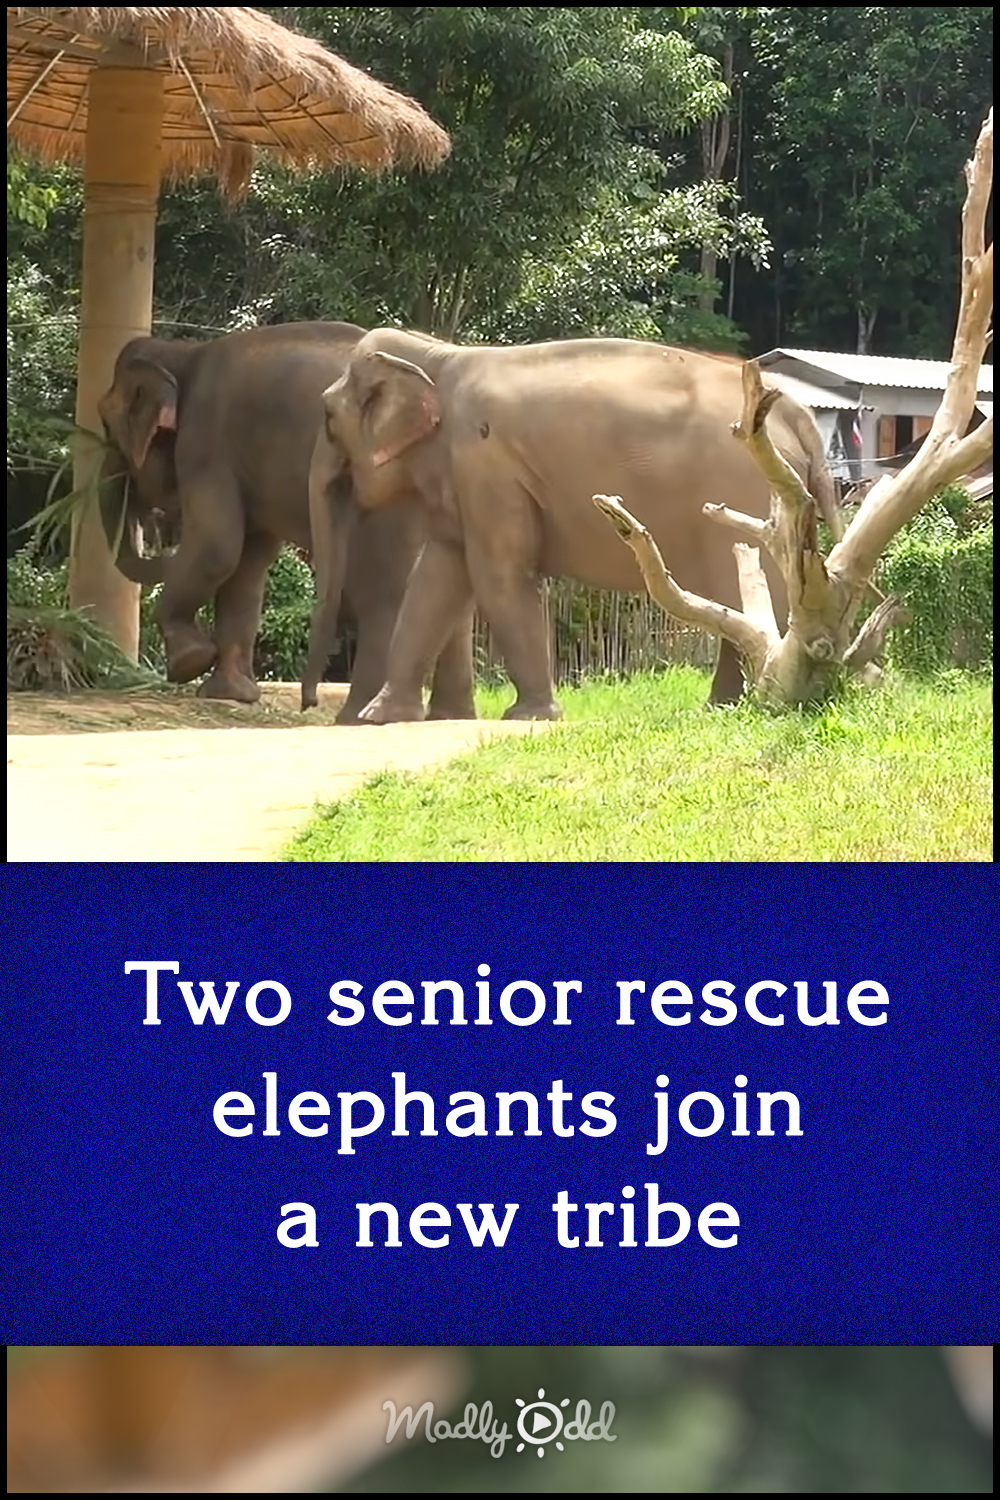 Two senior rescue elephants join a new tribe